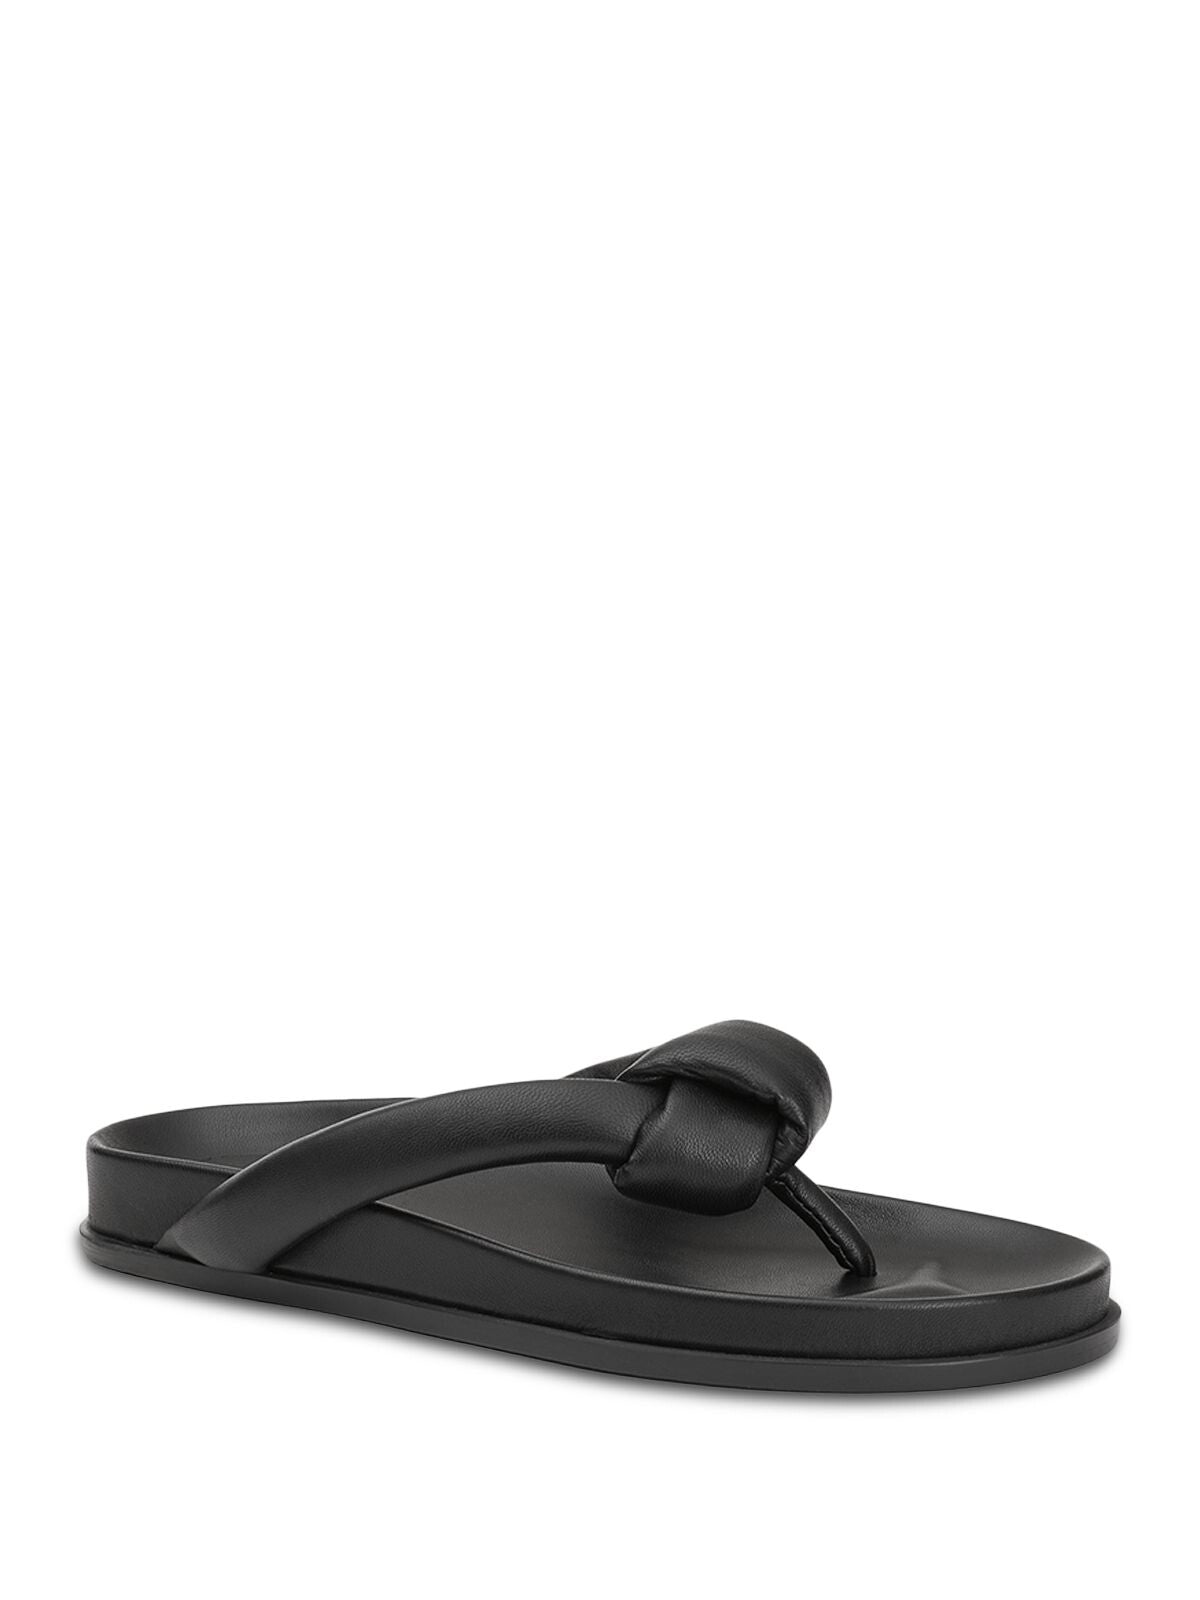 LAFAYETTE 148 NEW YORK Womens Black Knotted Strap Comfort Bristol Almond Toe Slip On Leather Thong Sandals Shoes 39